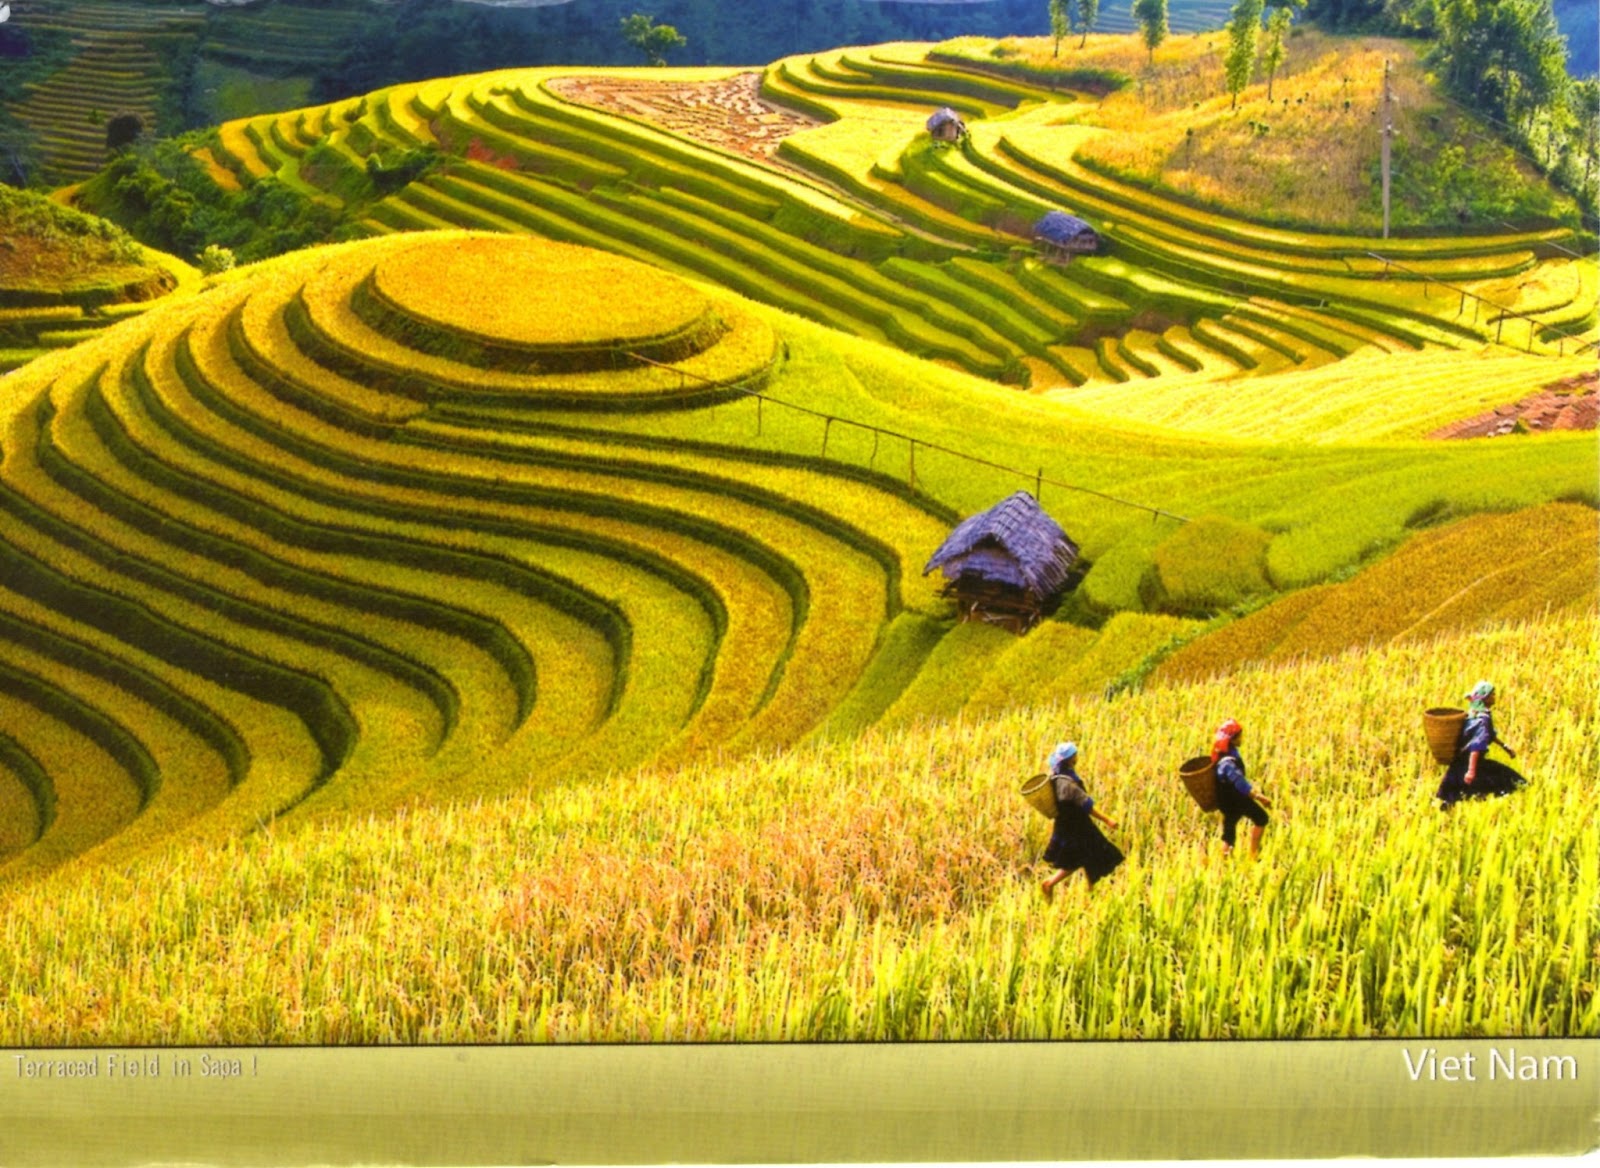 My postcard collection: Rice terraces in Sapa, Vietnam